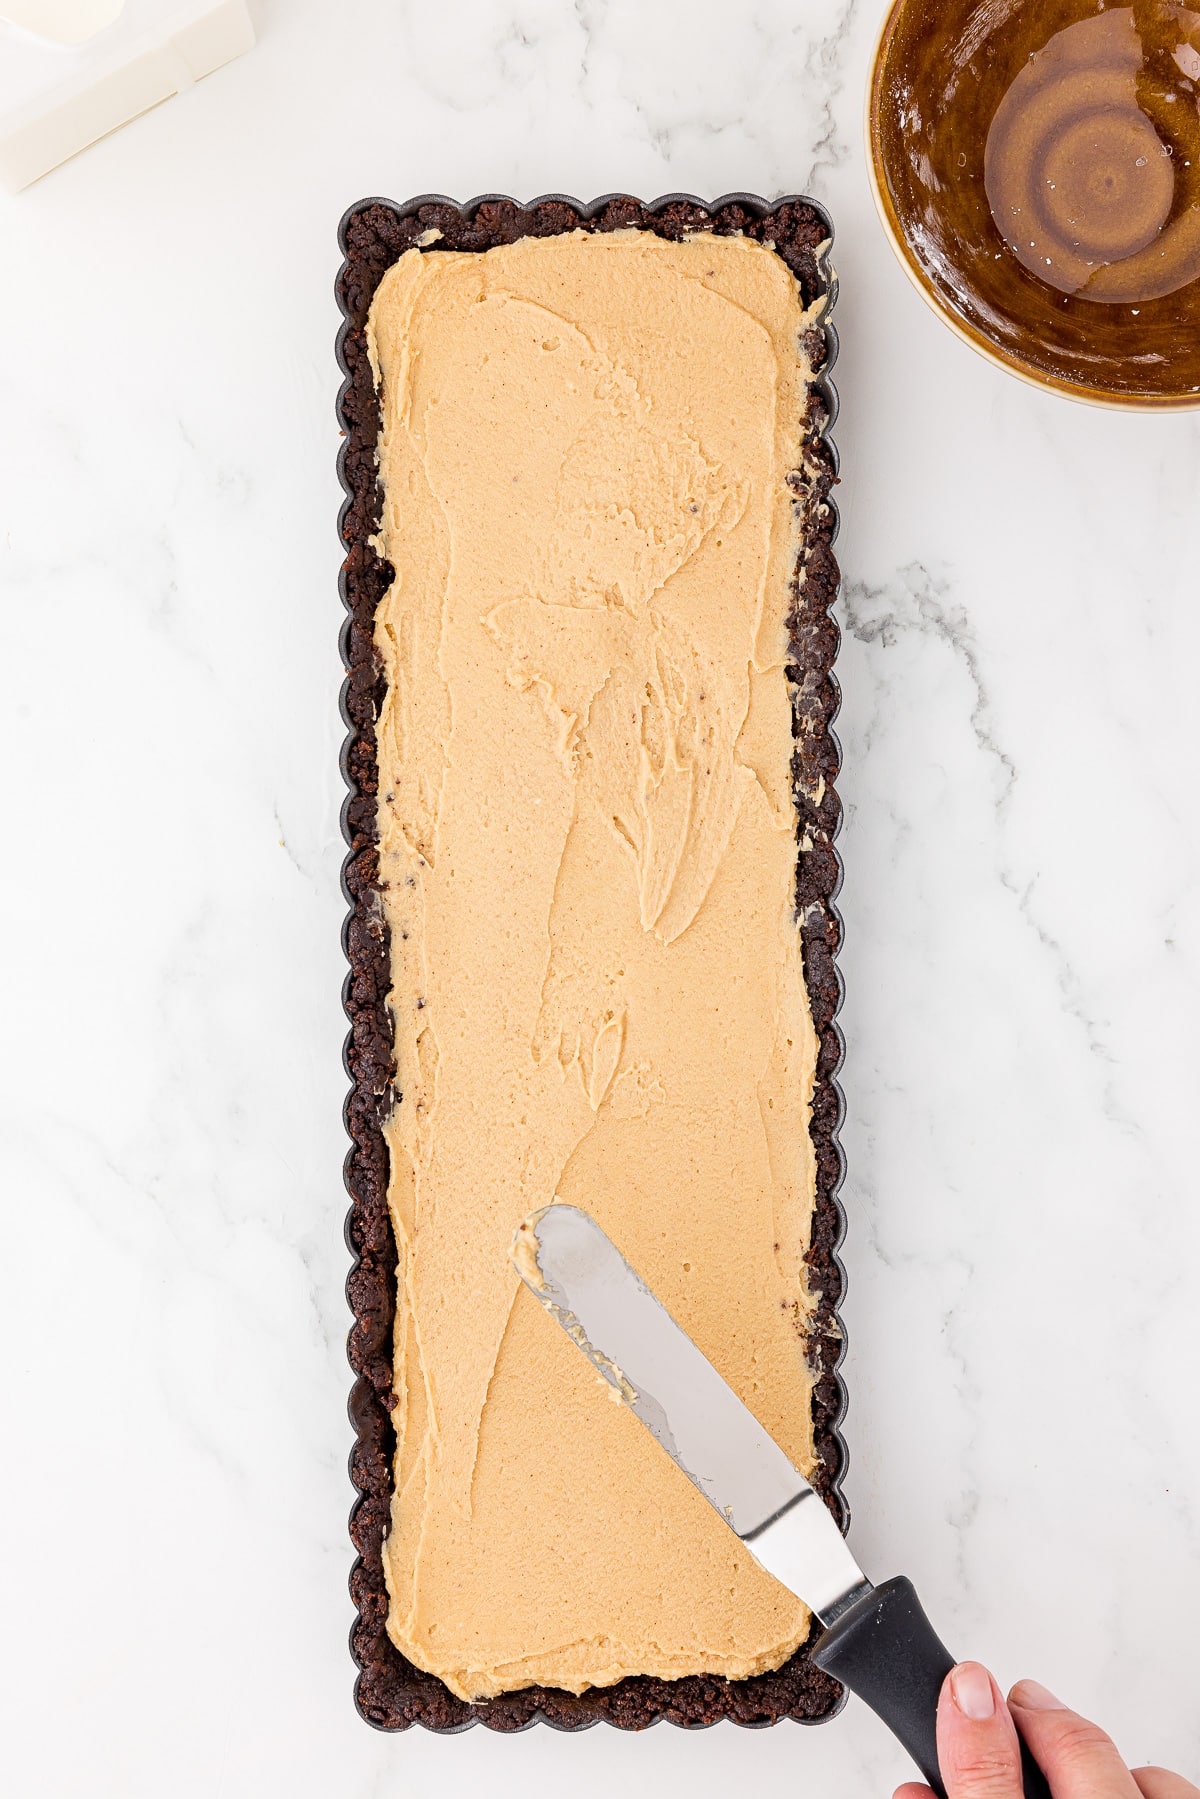 spreading peanut butter filling on a chocolate tart shell